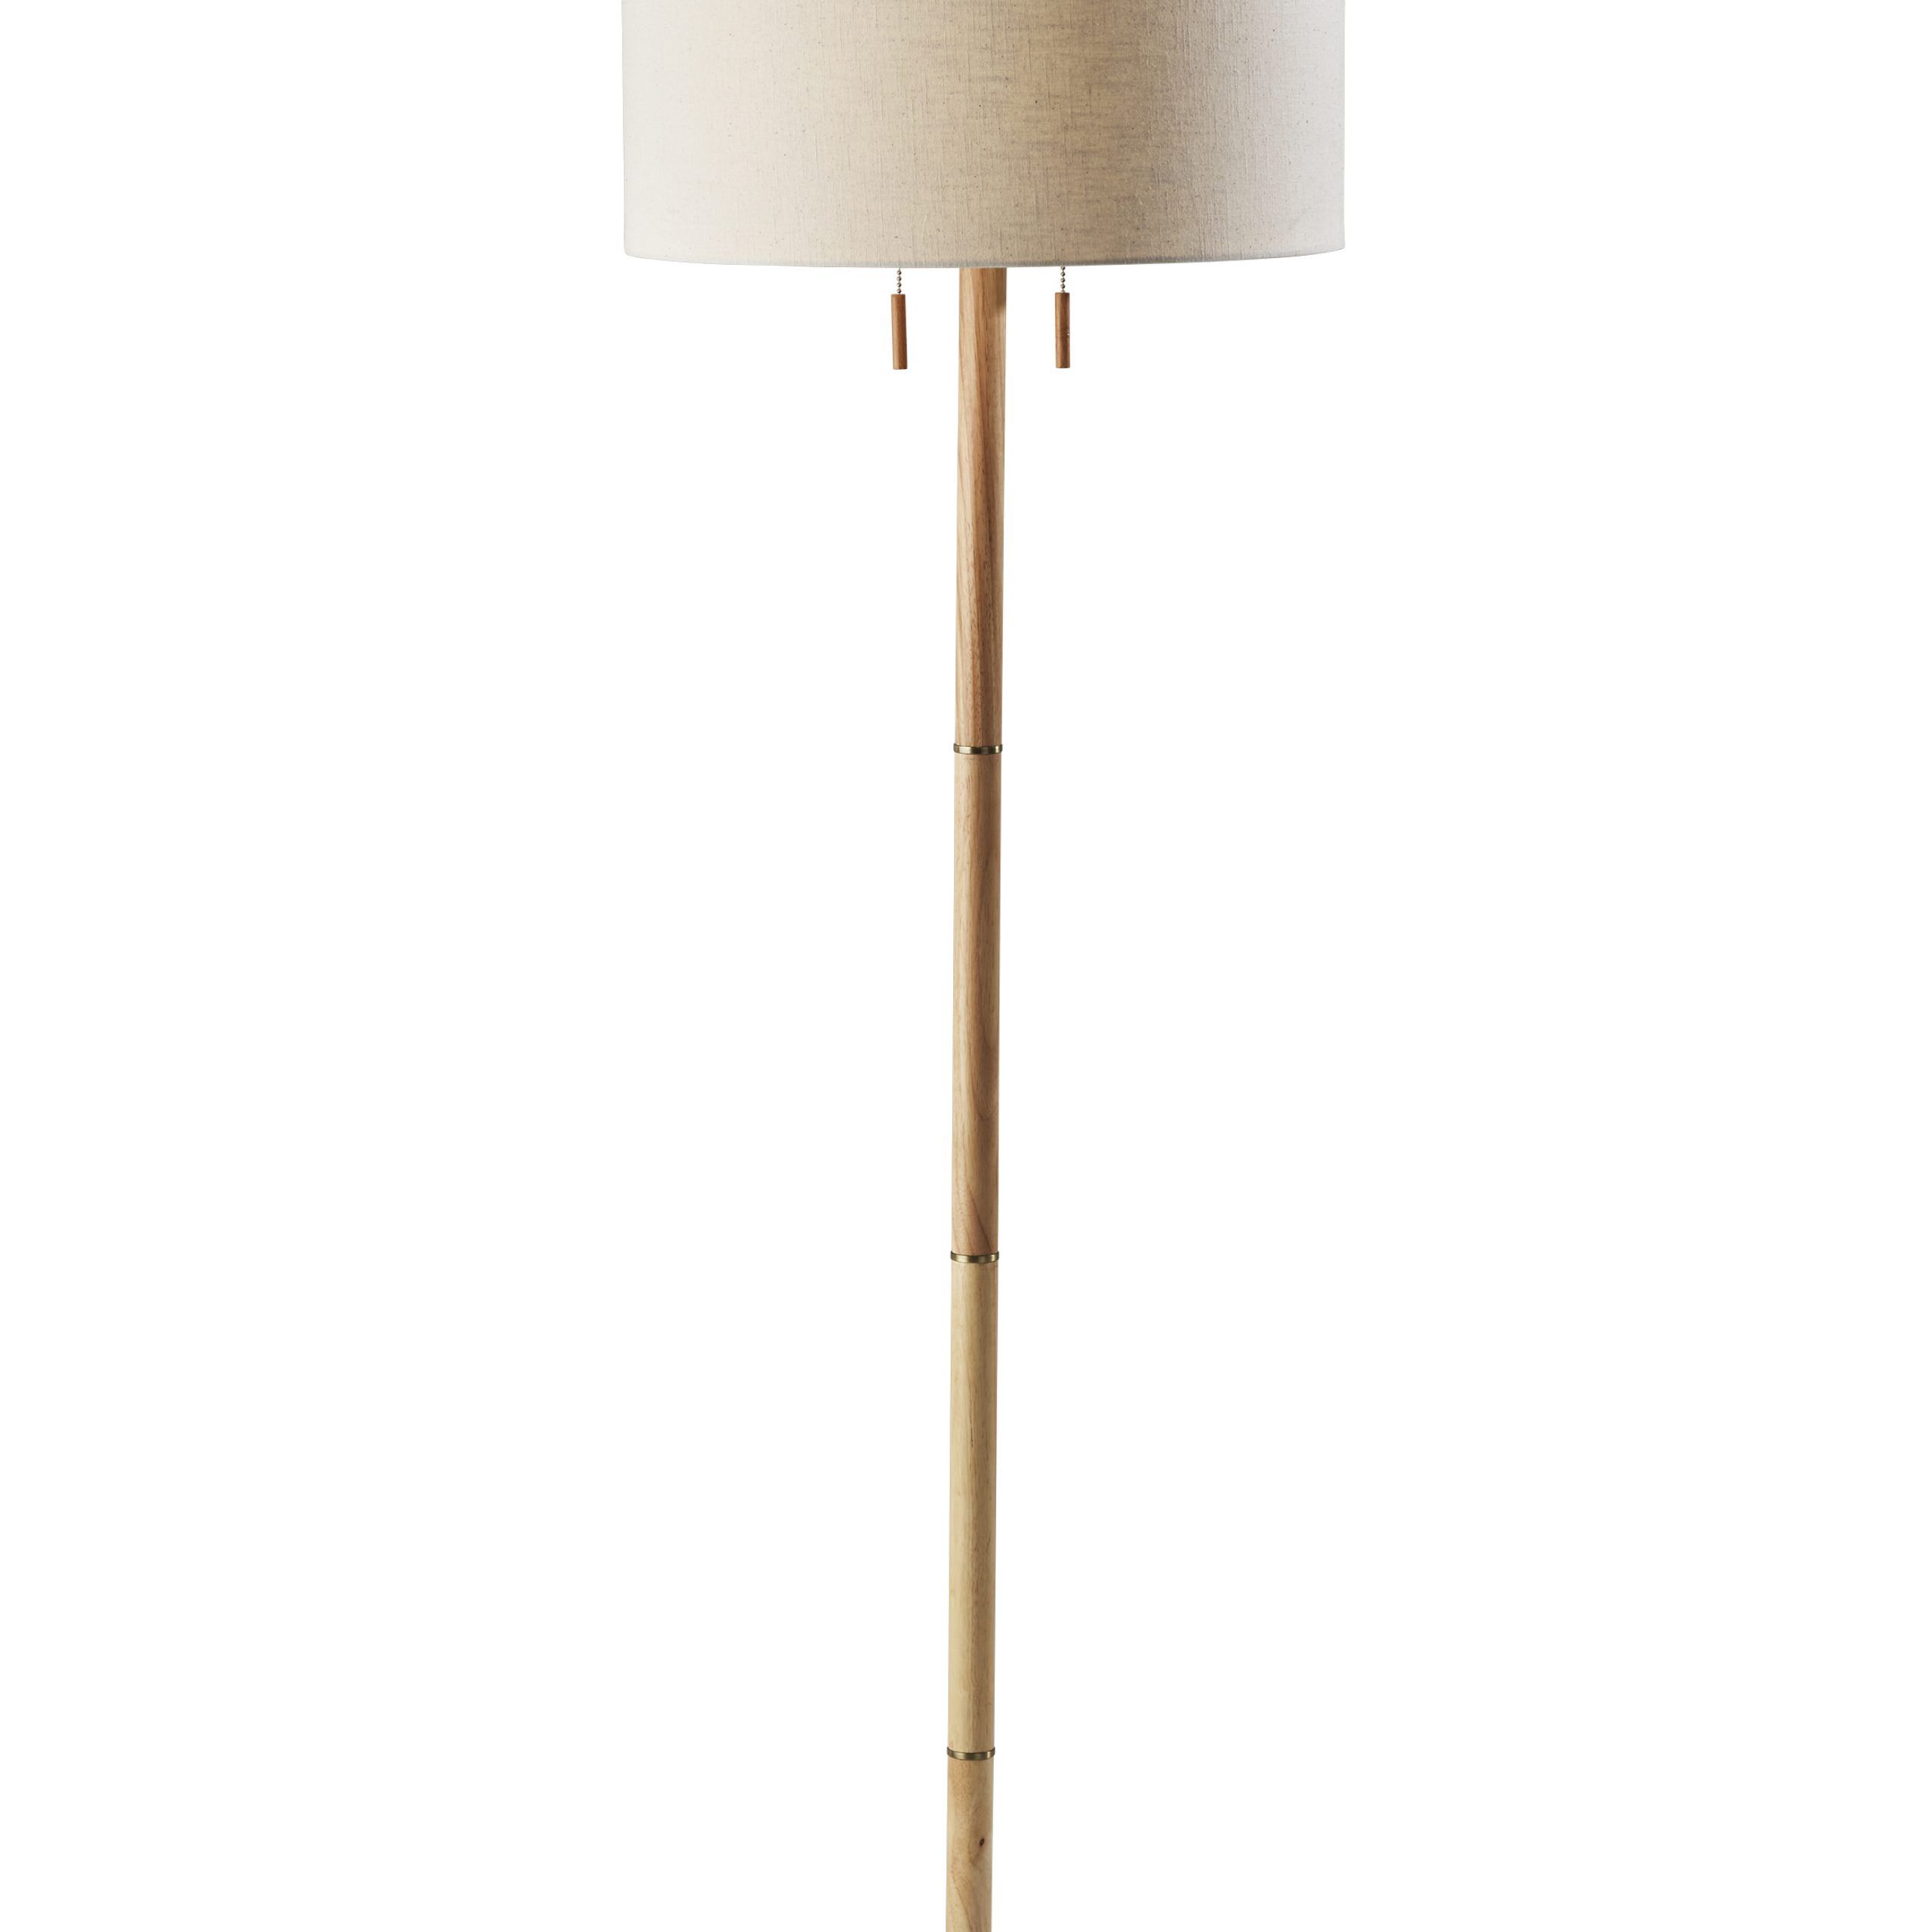 Adesso Madeline Floor Lamp, Natural Rubberwood Base & Antique Brass, Wood  Base, Off White Textured Fabric Shade – Walmart For Textured Fabric Floor Lamps (View 13 of 15)